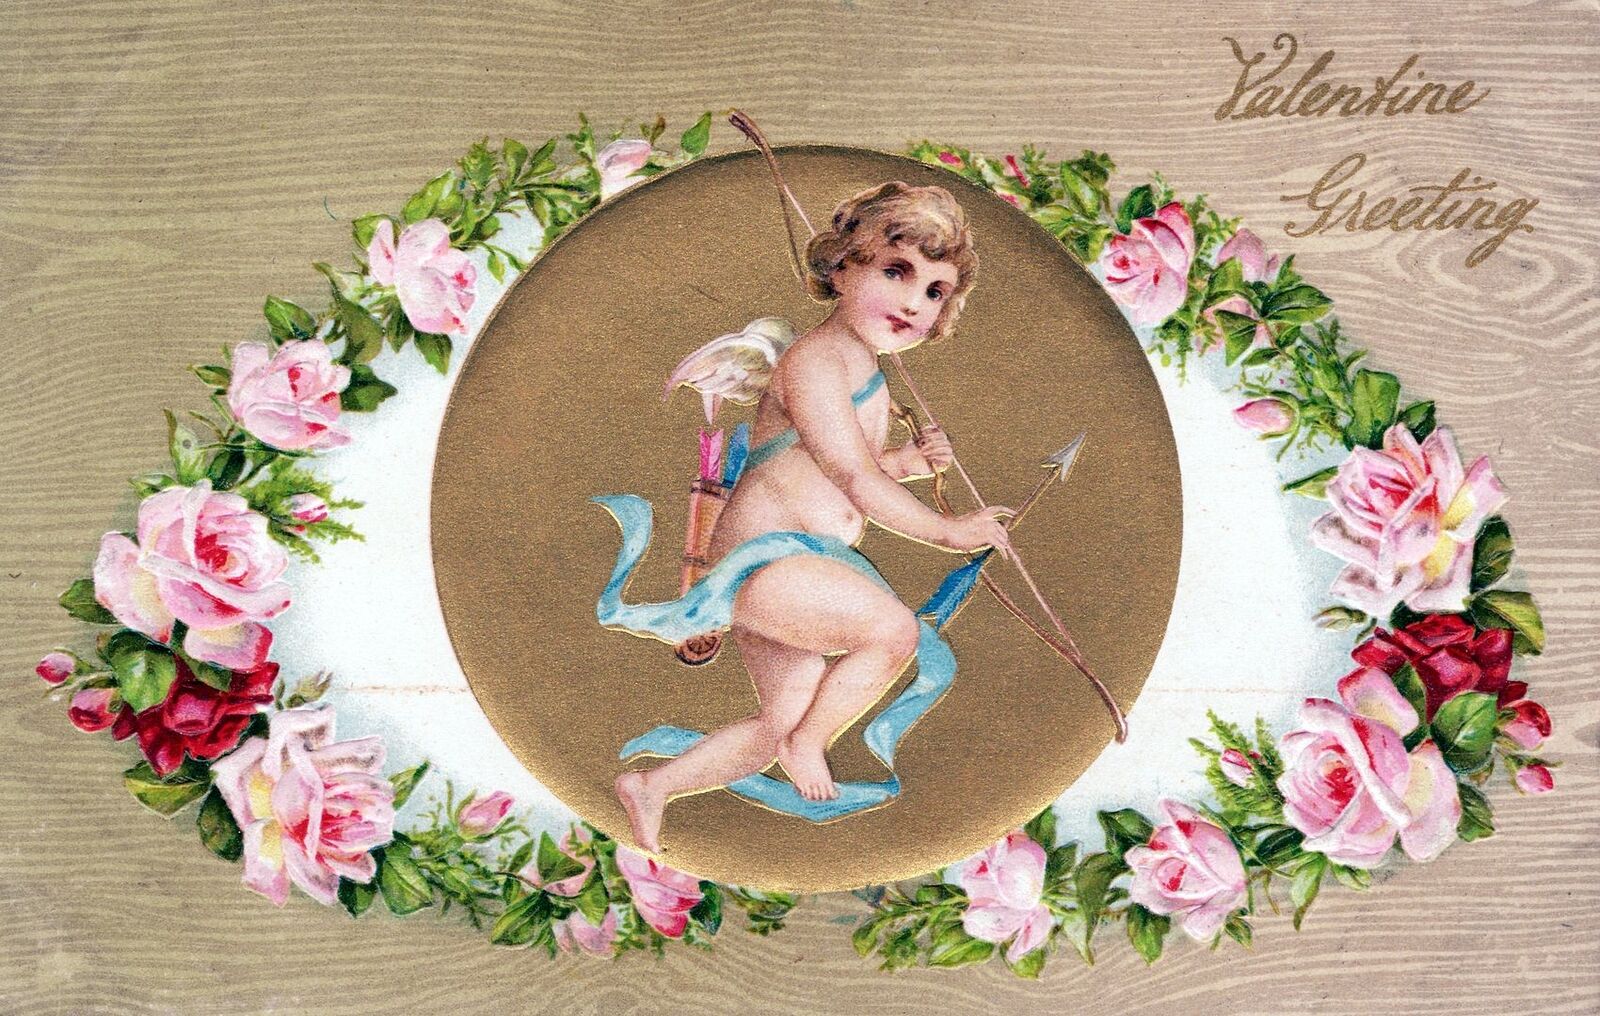 VALENTINE\'S DAY - Cupid And Flowers Valentine Greeting Postcard